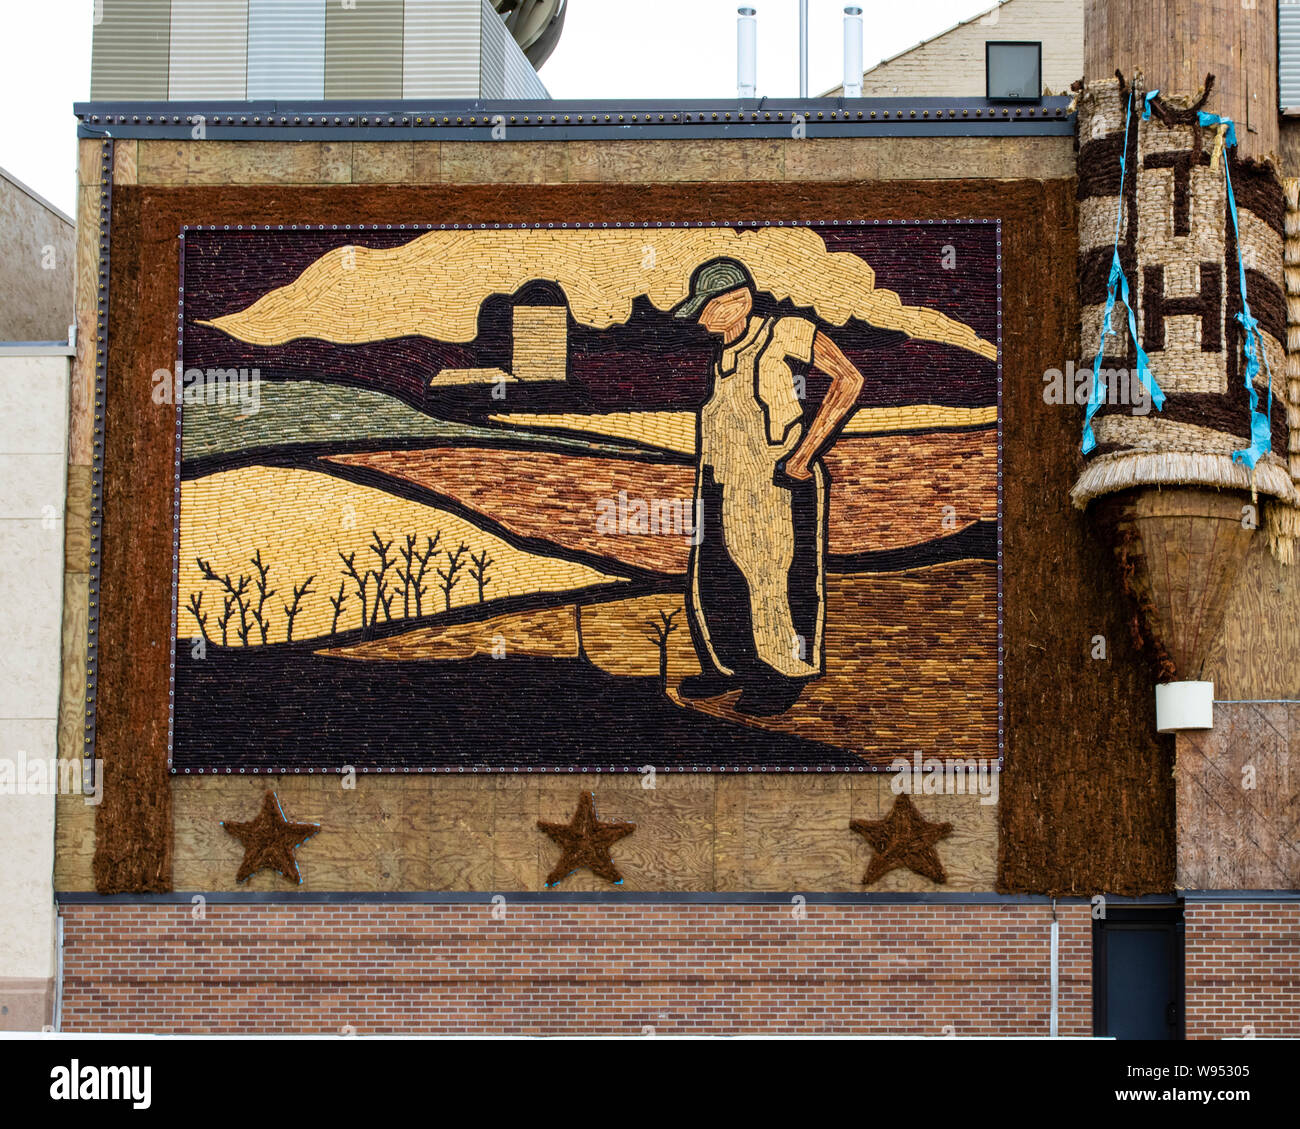 Art panels made of corn at the world's only corn palace, located in Mitchell South Dakota Stock Photo